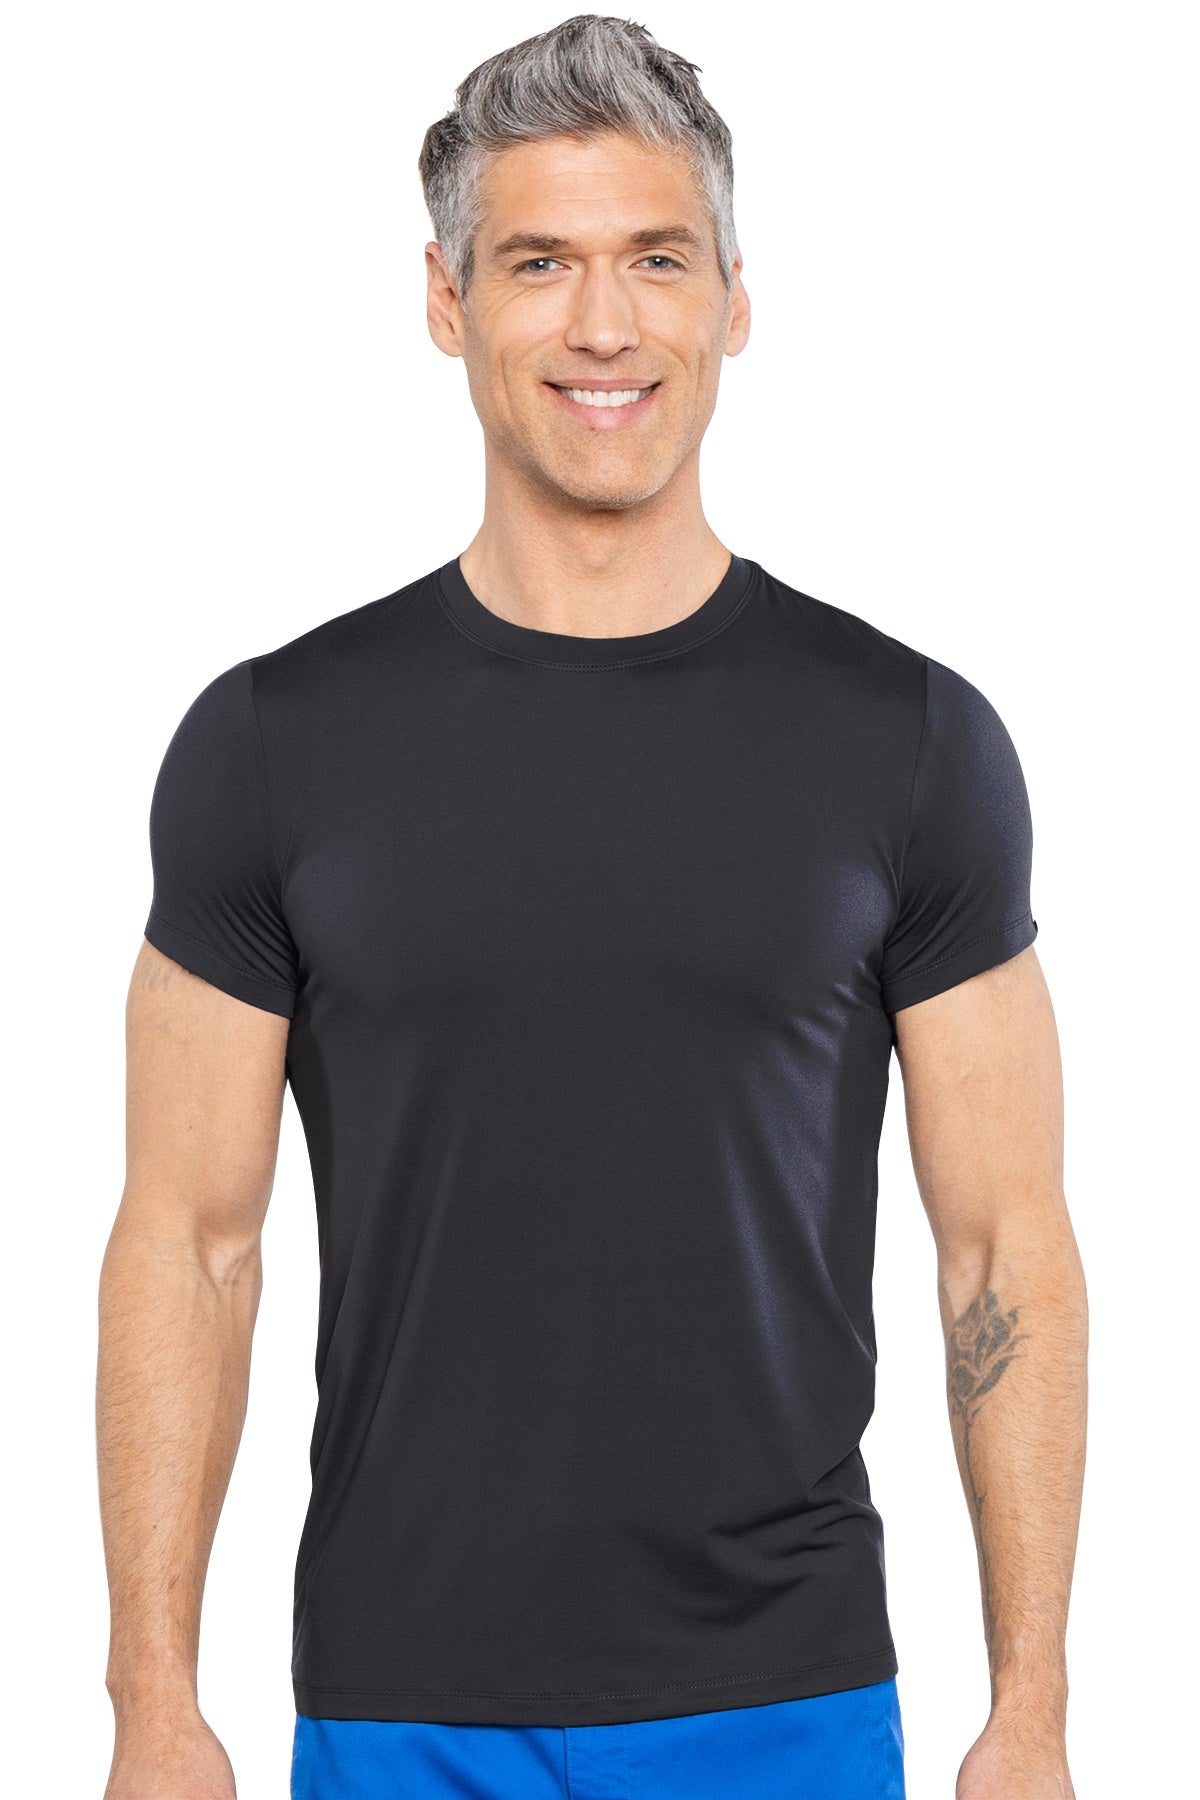 Med Couture Mens Scrub Top RothWear Mason Tee in Black at Parker's Clothing and Shoes.